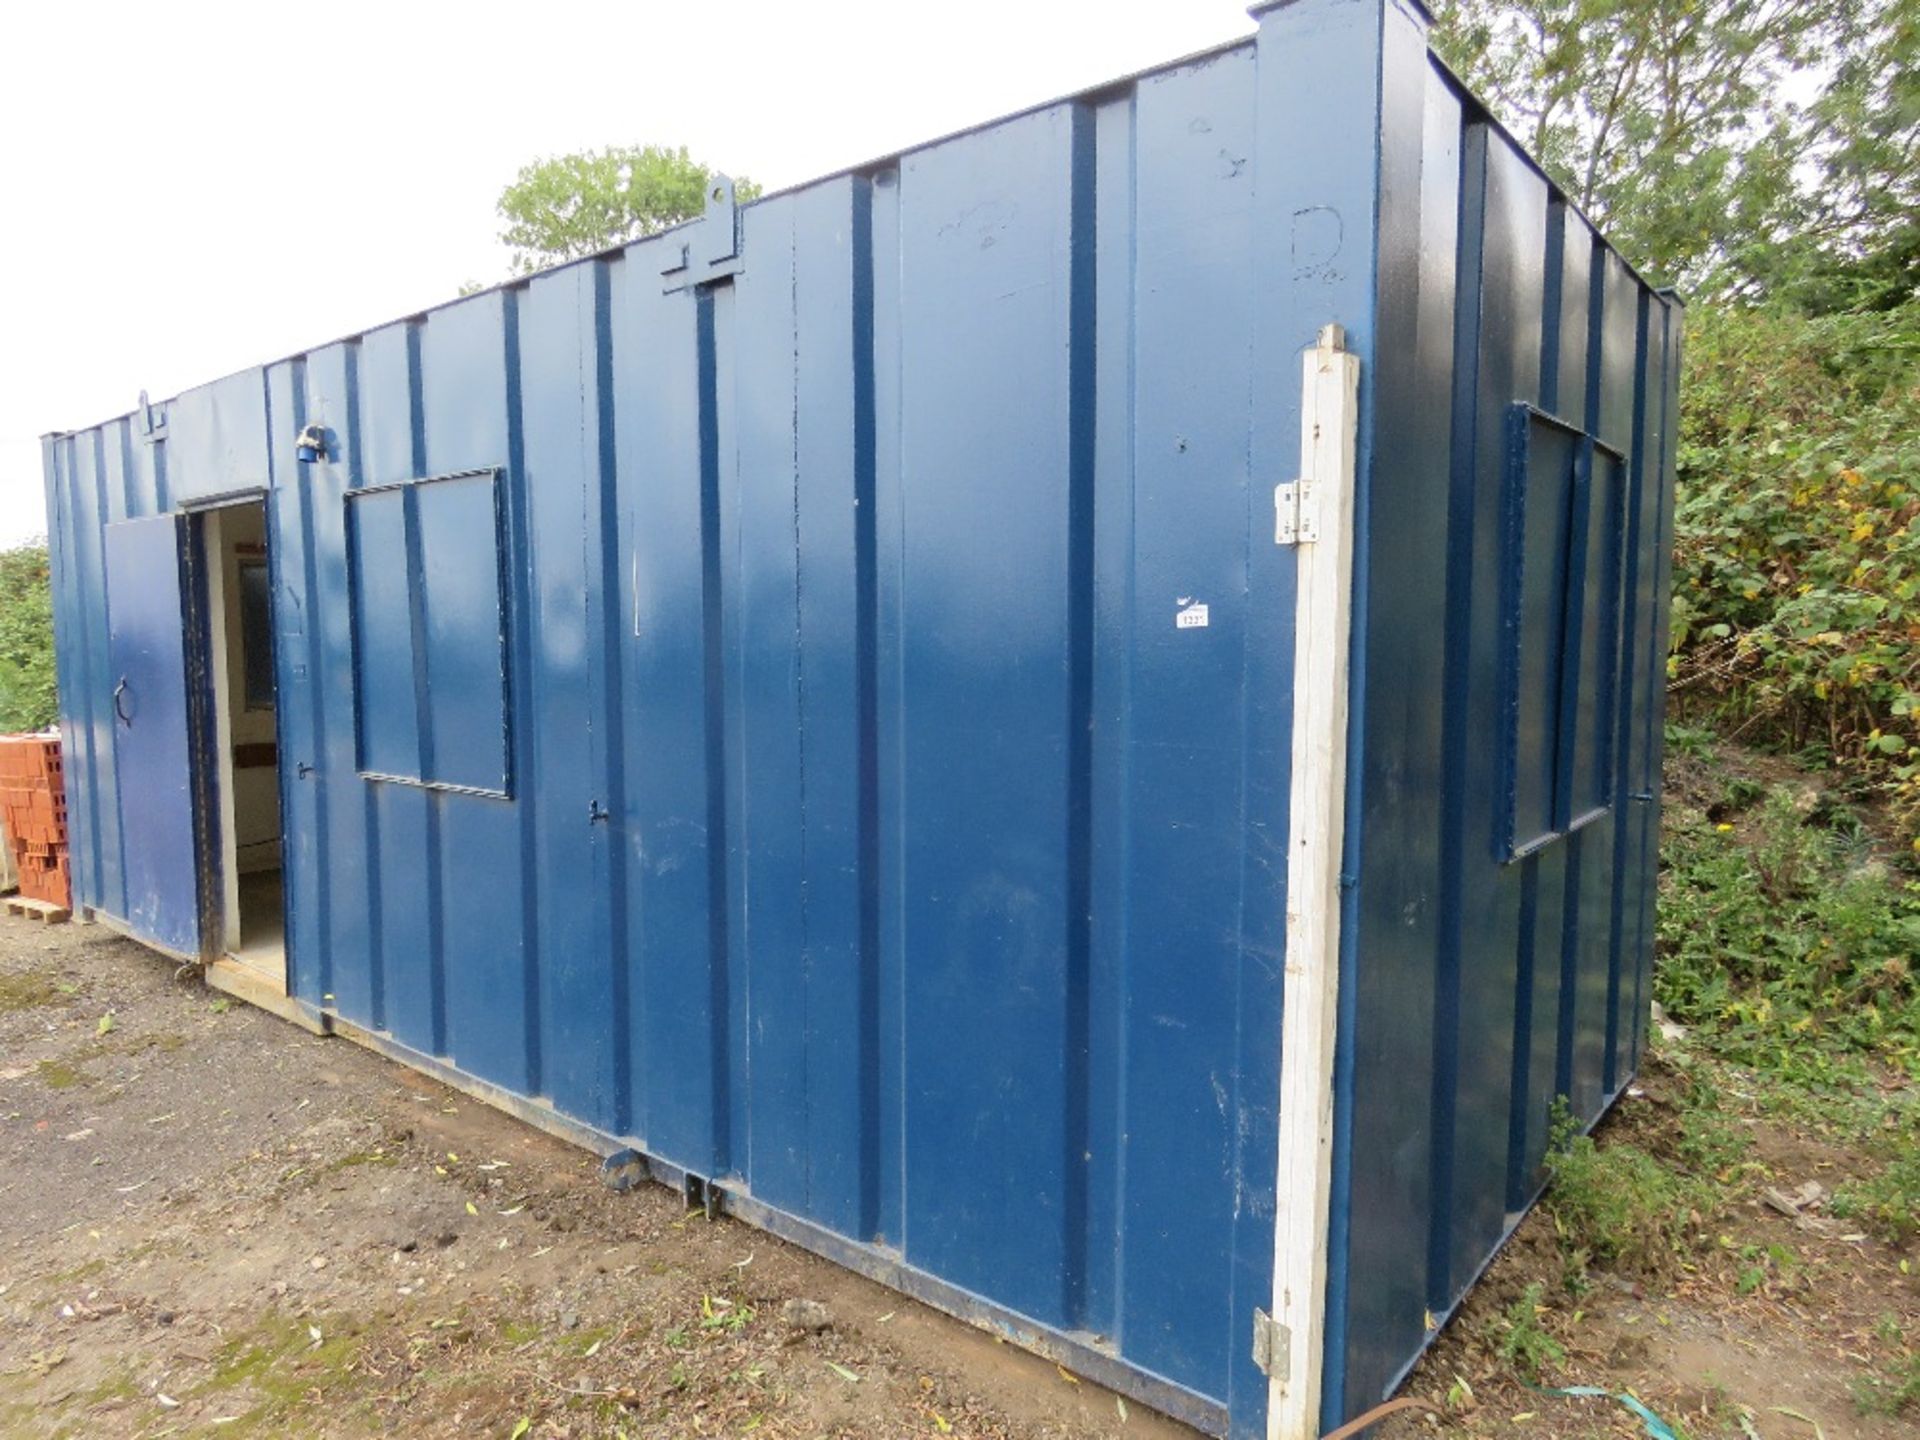 SECURE METAL CONTAINERISED OFFICE, 24FT X 9FT APPROX. UNLOCKED, NO KEYS. BUYER TO ARRANGE CRANEAGE F